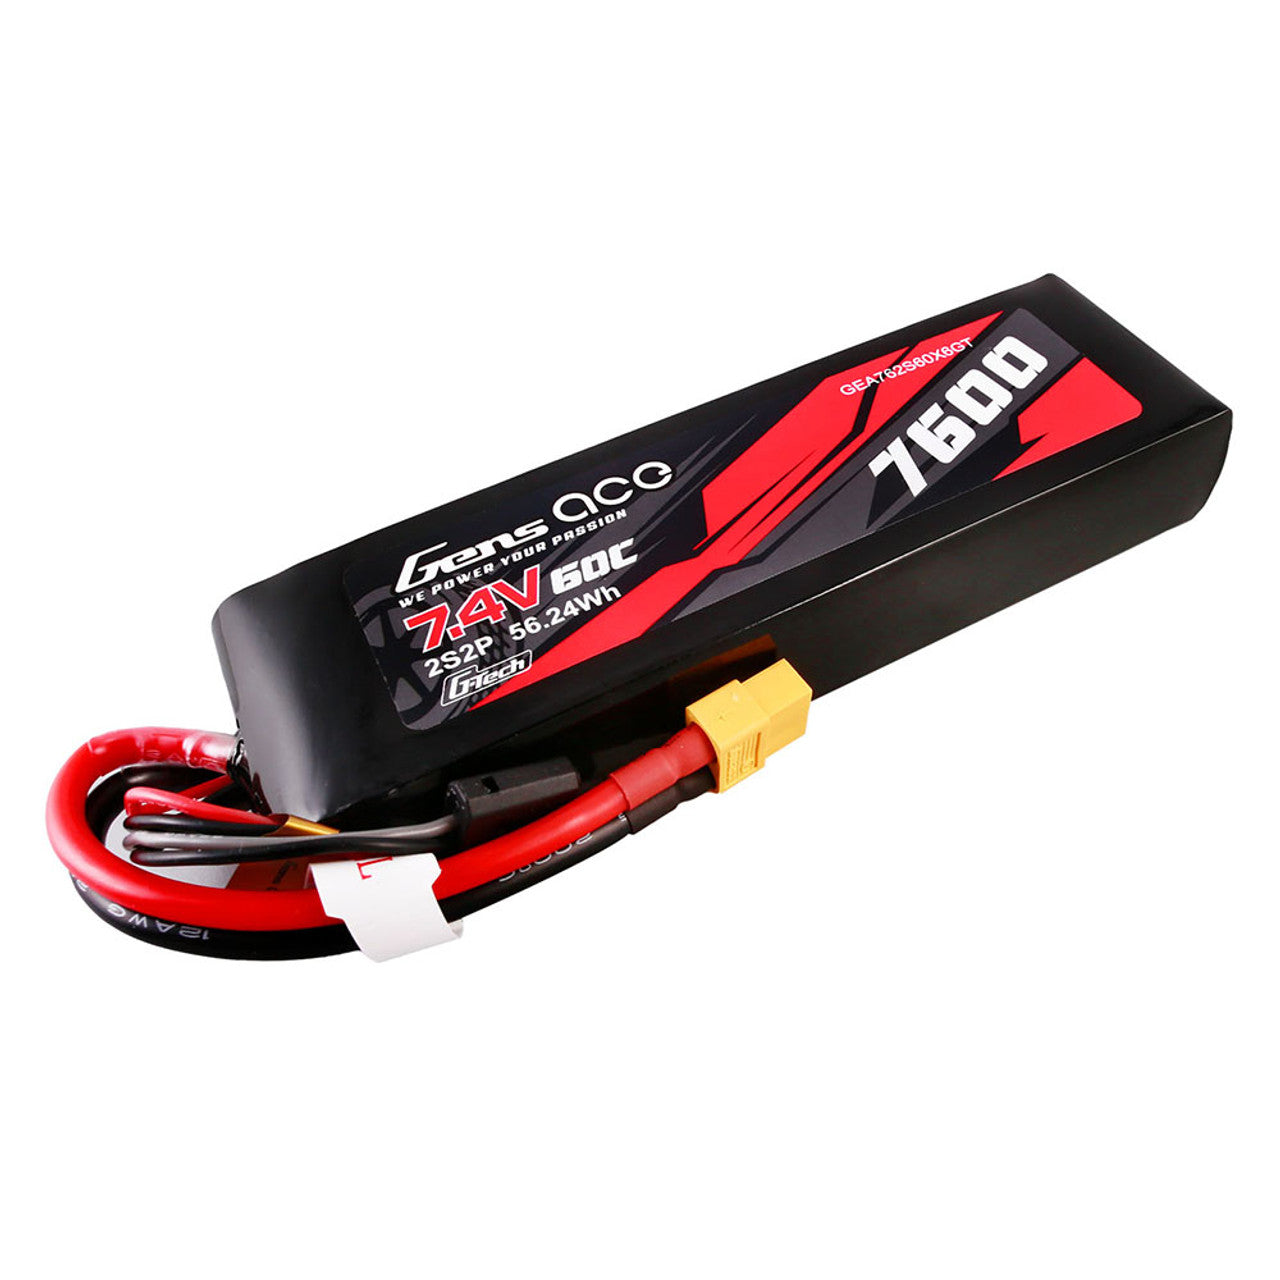 GEA762S60X6GT Gens Ace G-Tech 7600mAh 7.4V 60C 2S2P Lipo Battery Pack With XT60 Plug